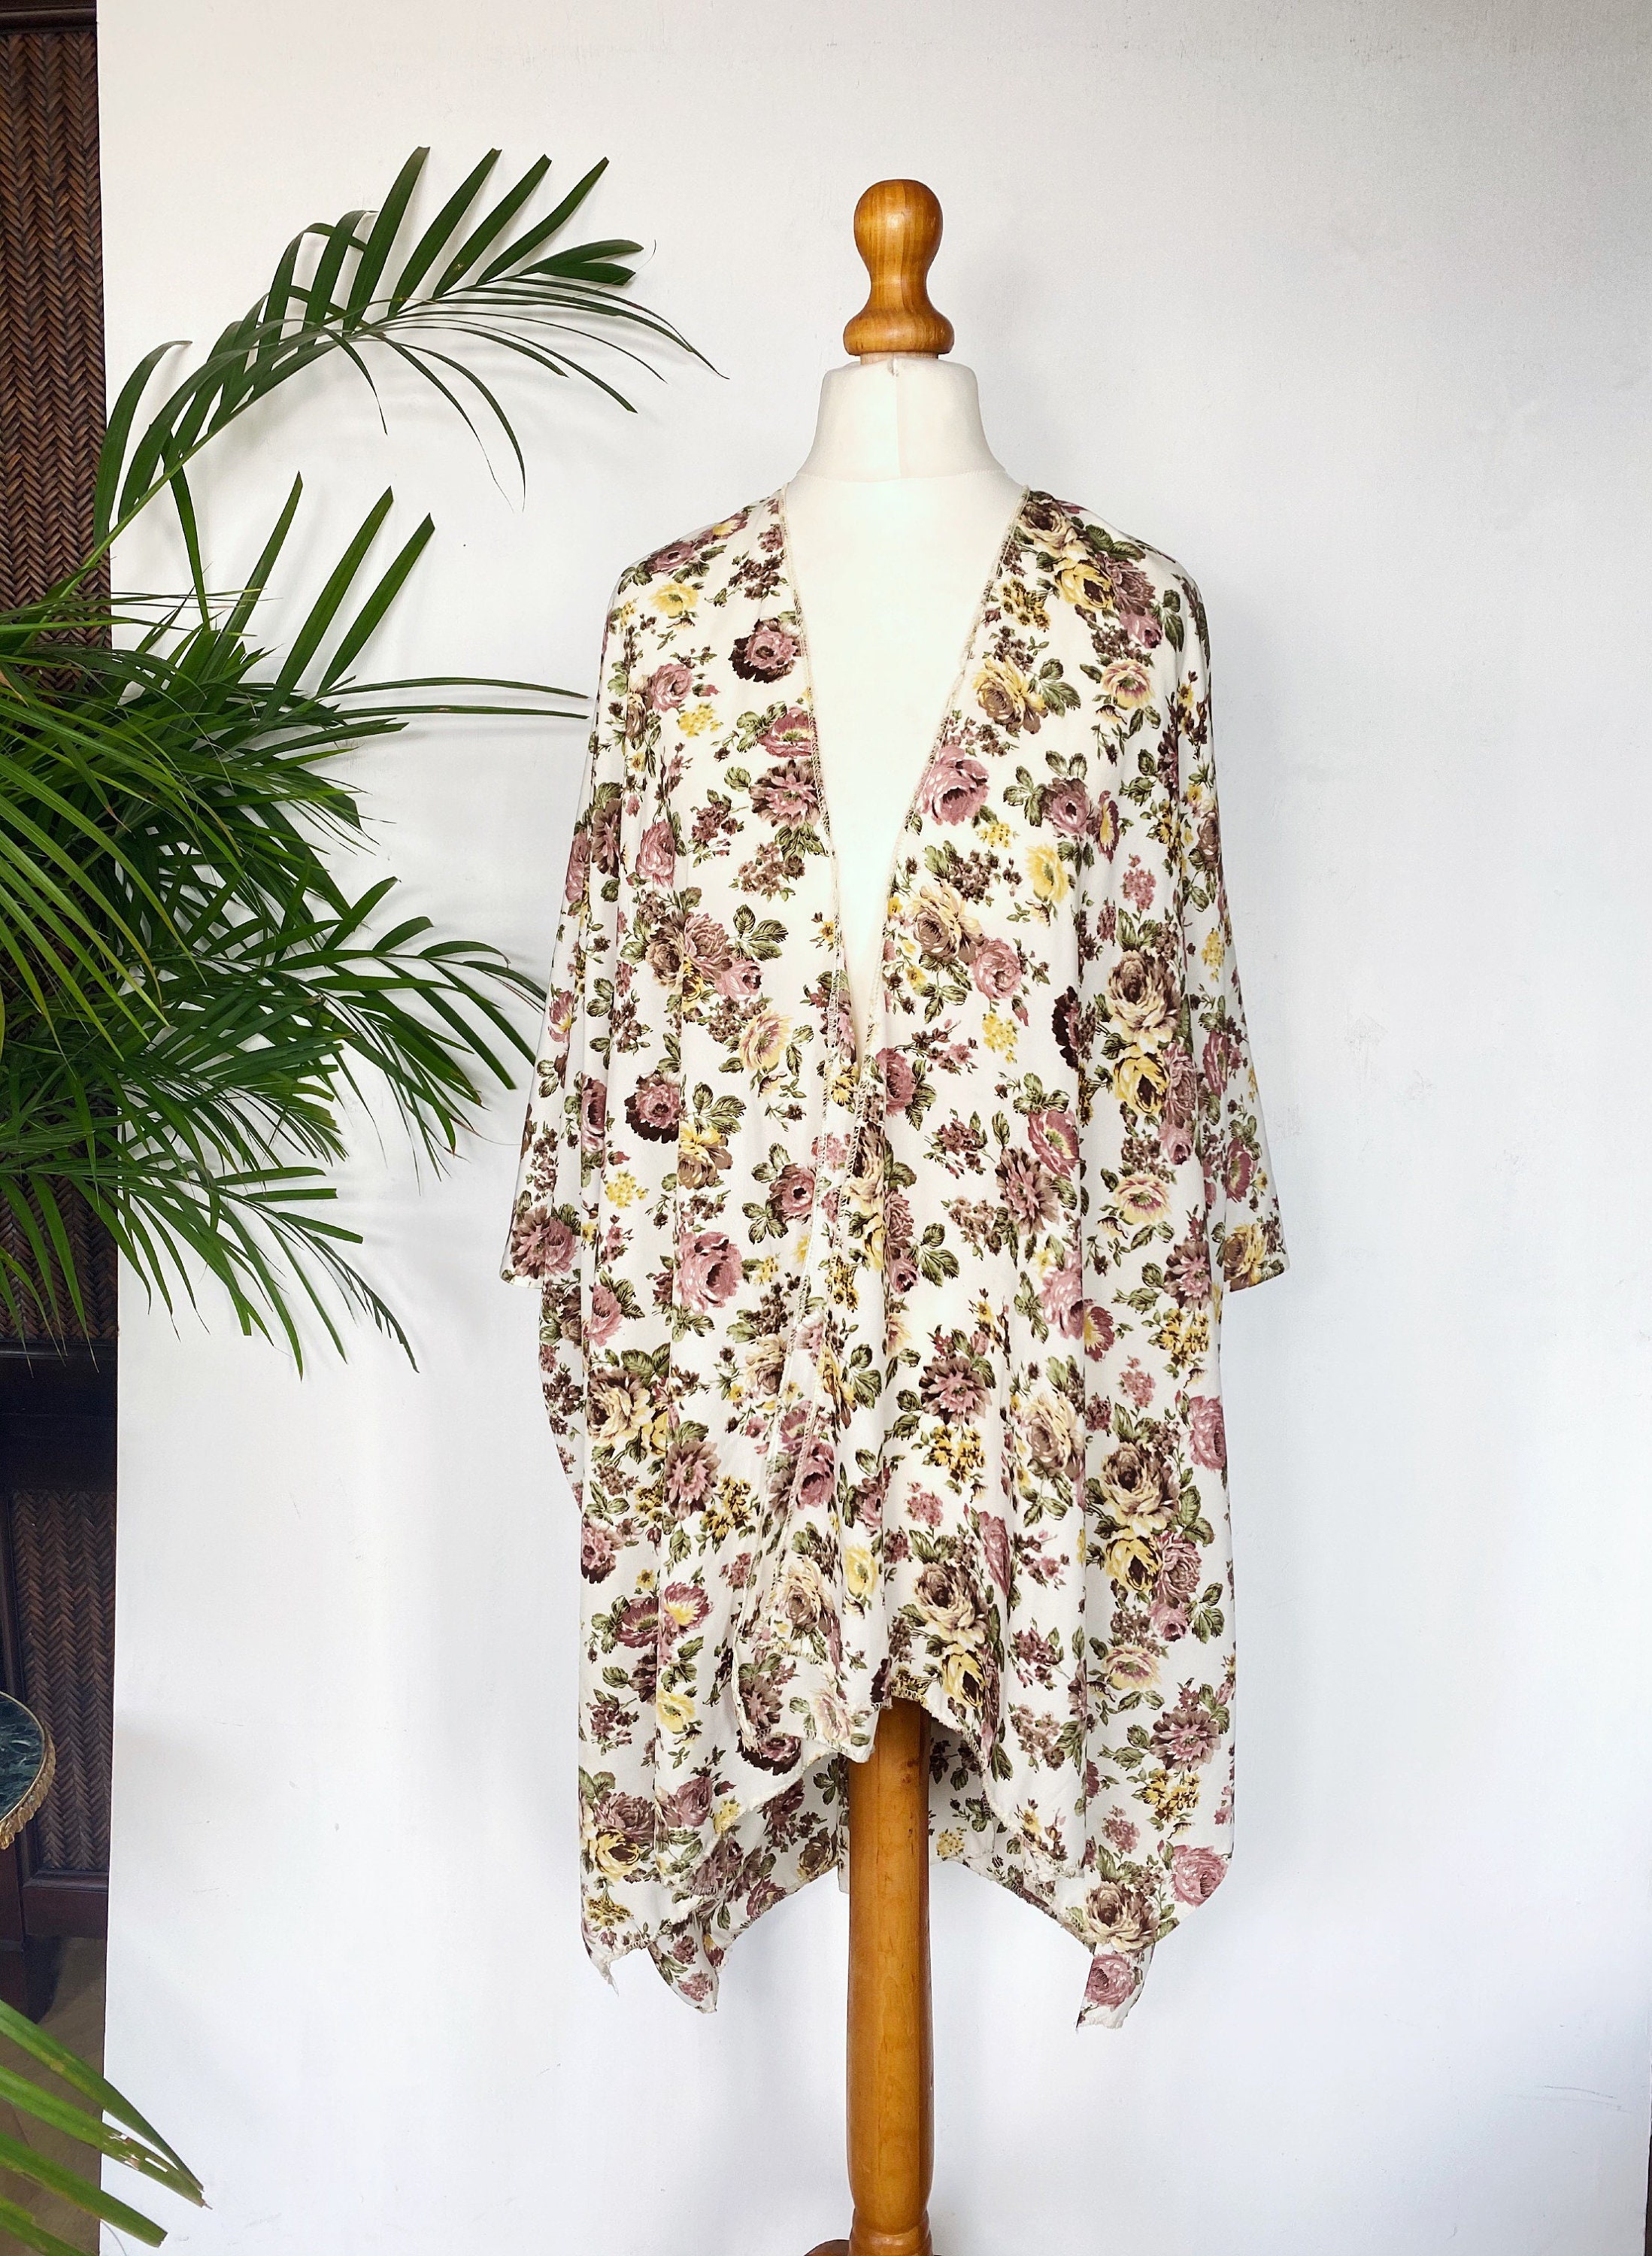 Vintage 50s Style Floral Festival Boho Aesthetic Lightweight Spring Summer Jacket Cover Over Handmade Floral Kimono Robe Free Size